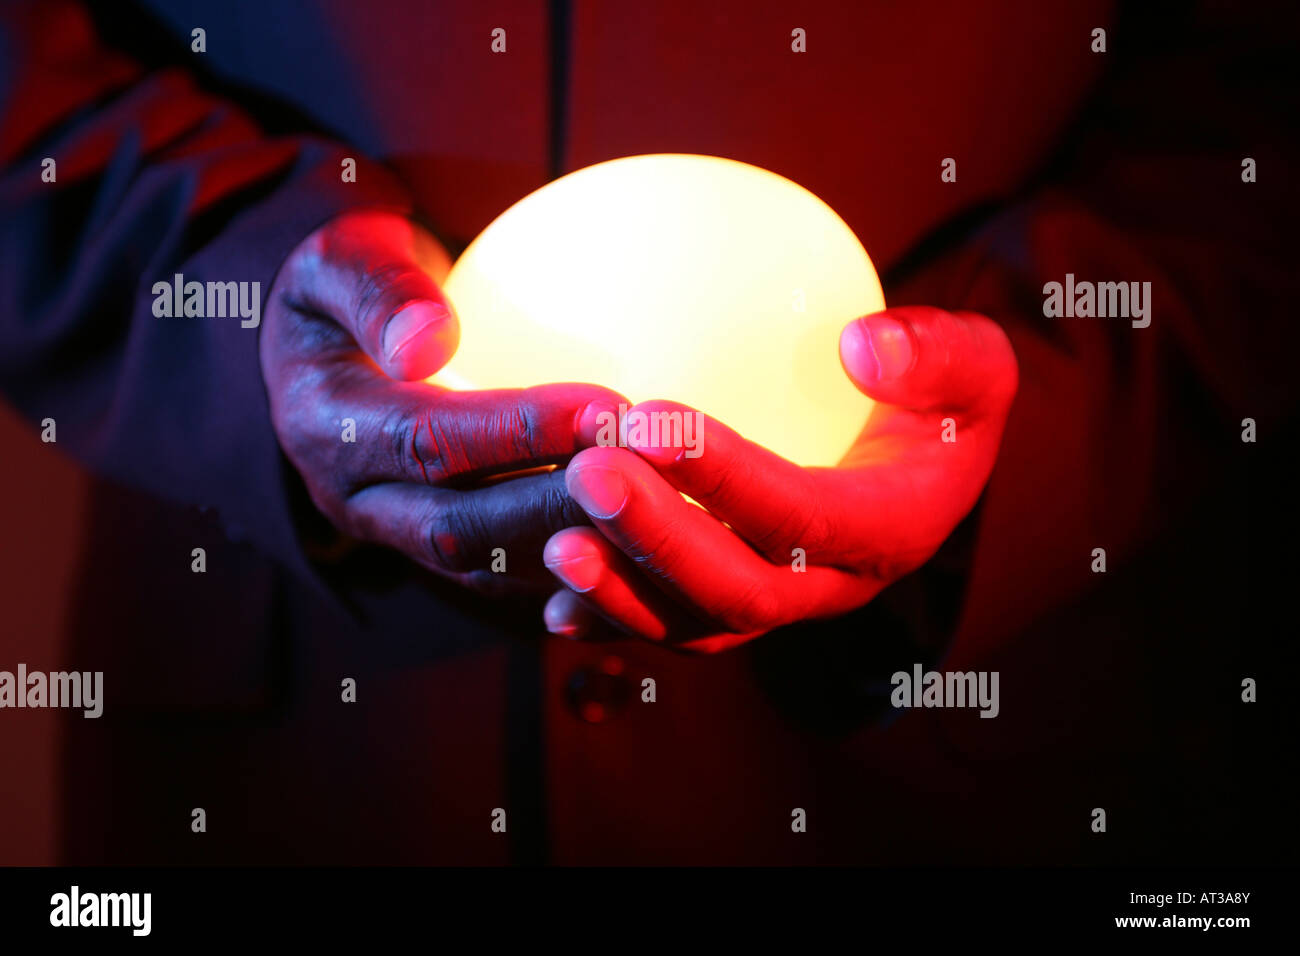 A man holding an oval light in both hands Stock Photo